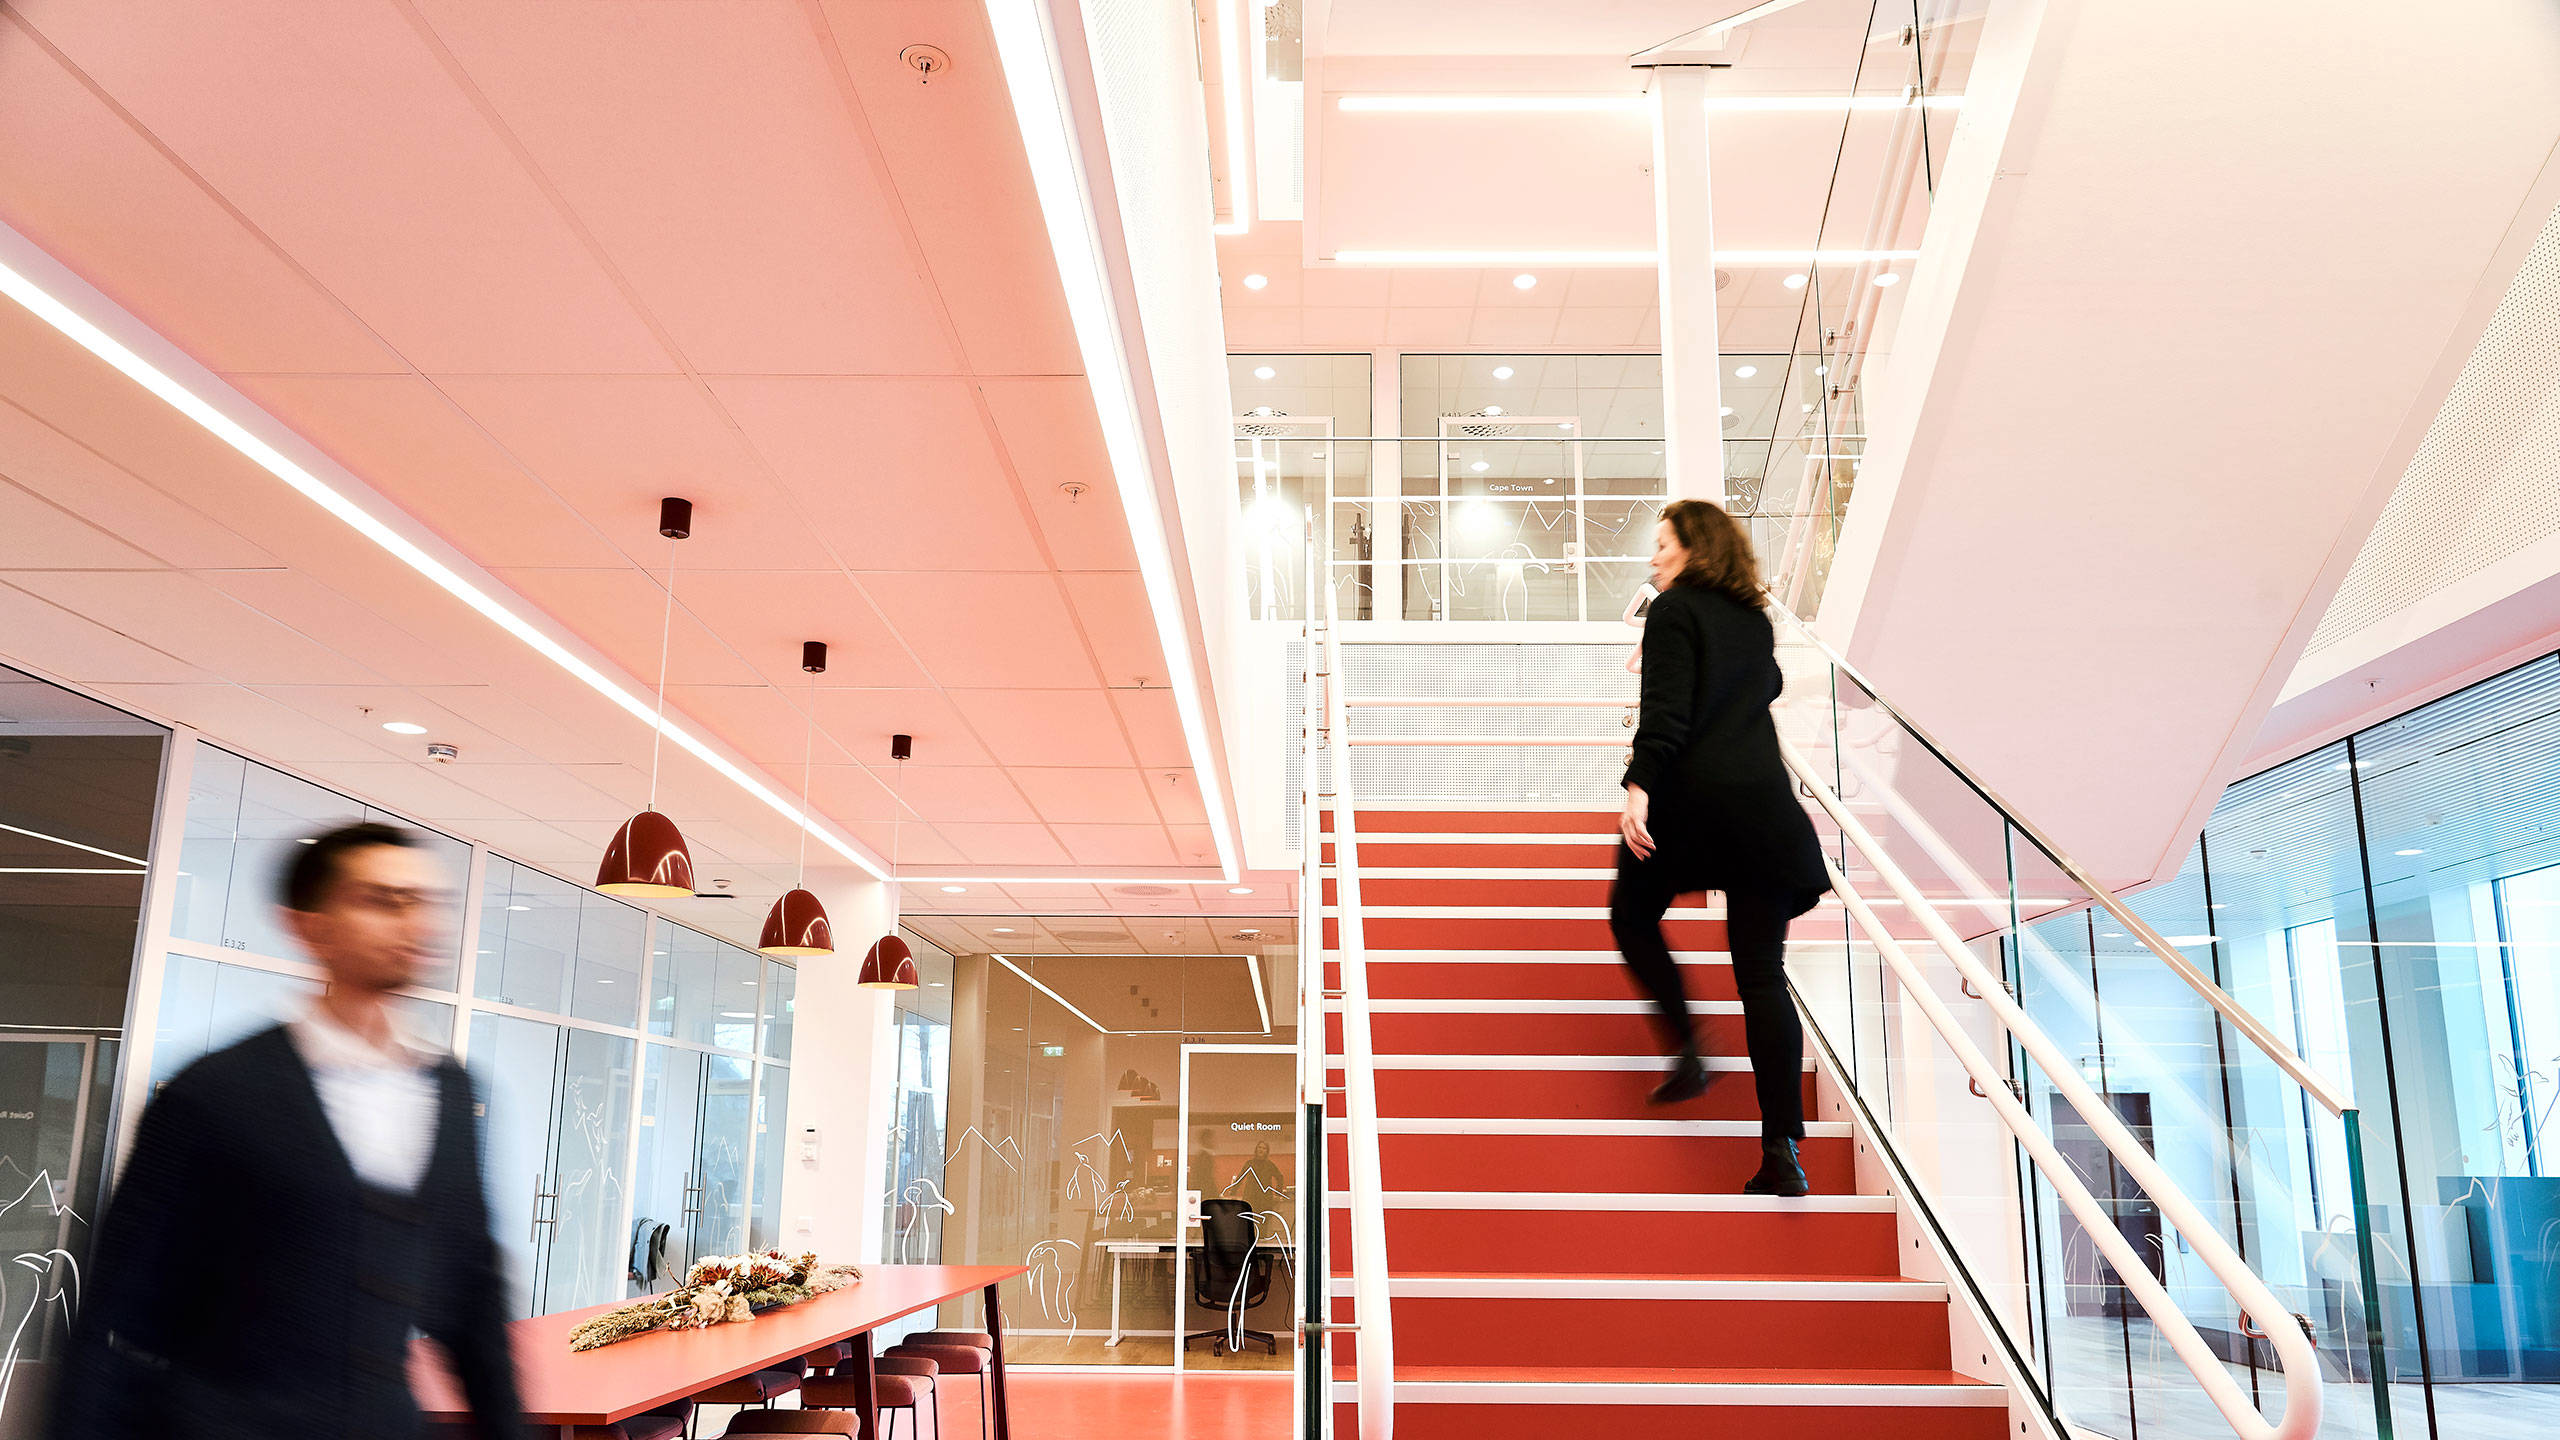 People walking in the stairs at Jotun's office in Sandefjord, Norway